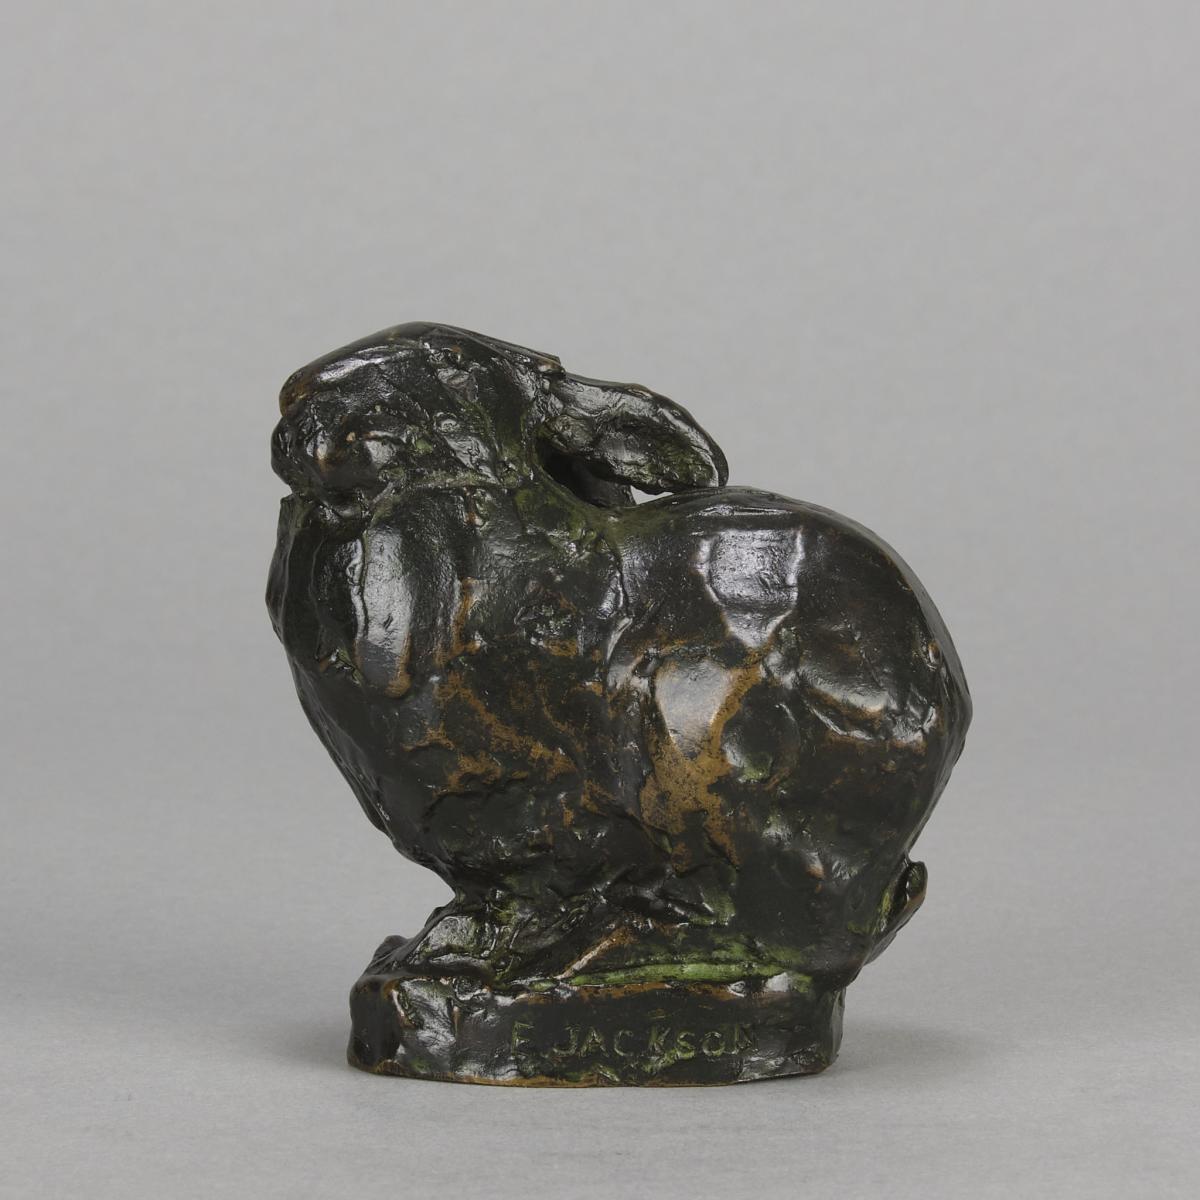 Early 20th Century Bronze Sculpture entitled "Seated Rabbit" by Ernest Jackson